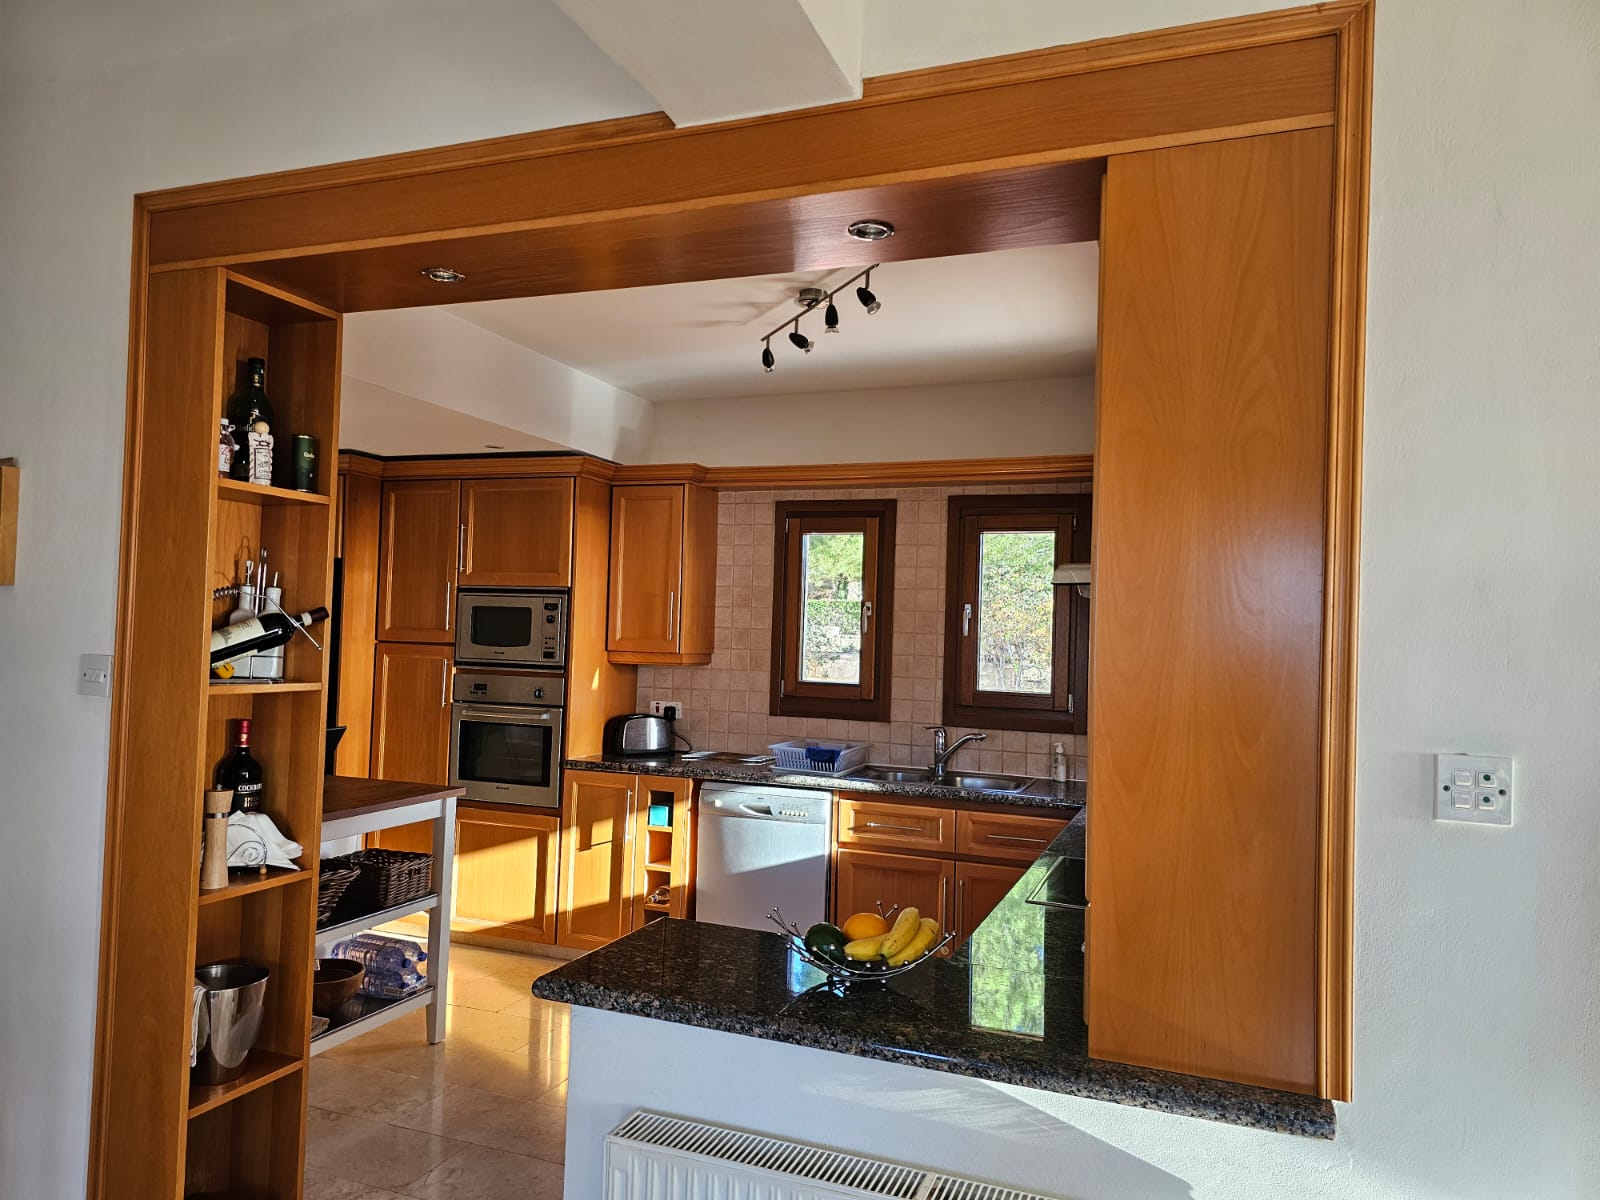 Hauson Realty - Cyprus Real Estate Agents A kitchen with wooden cabinets and counter tops.